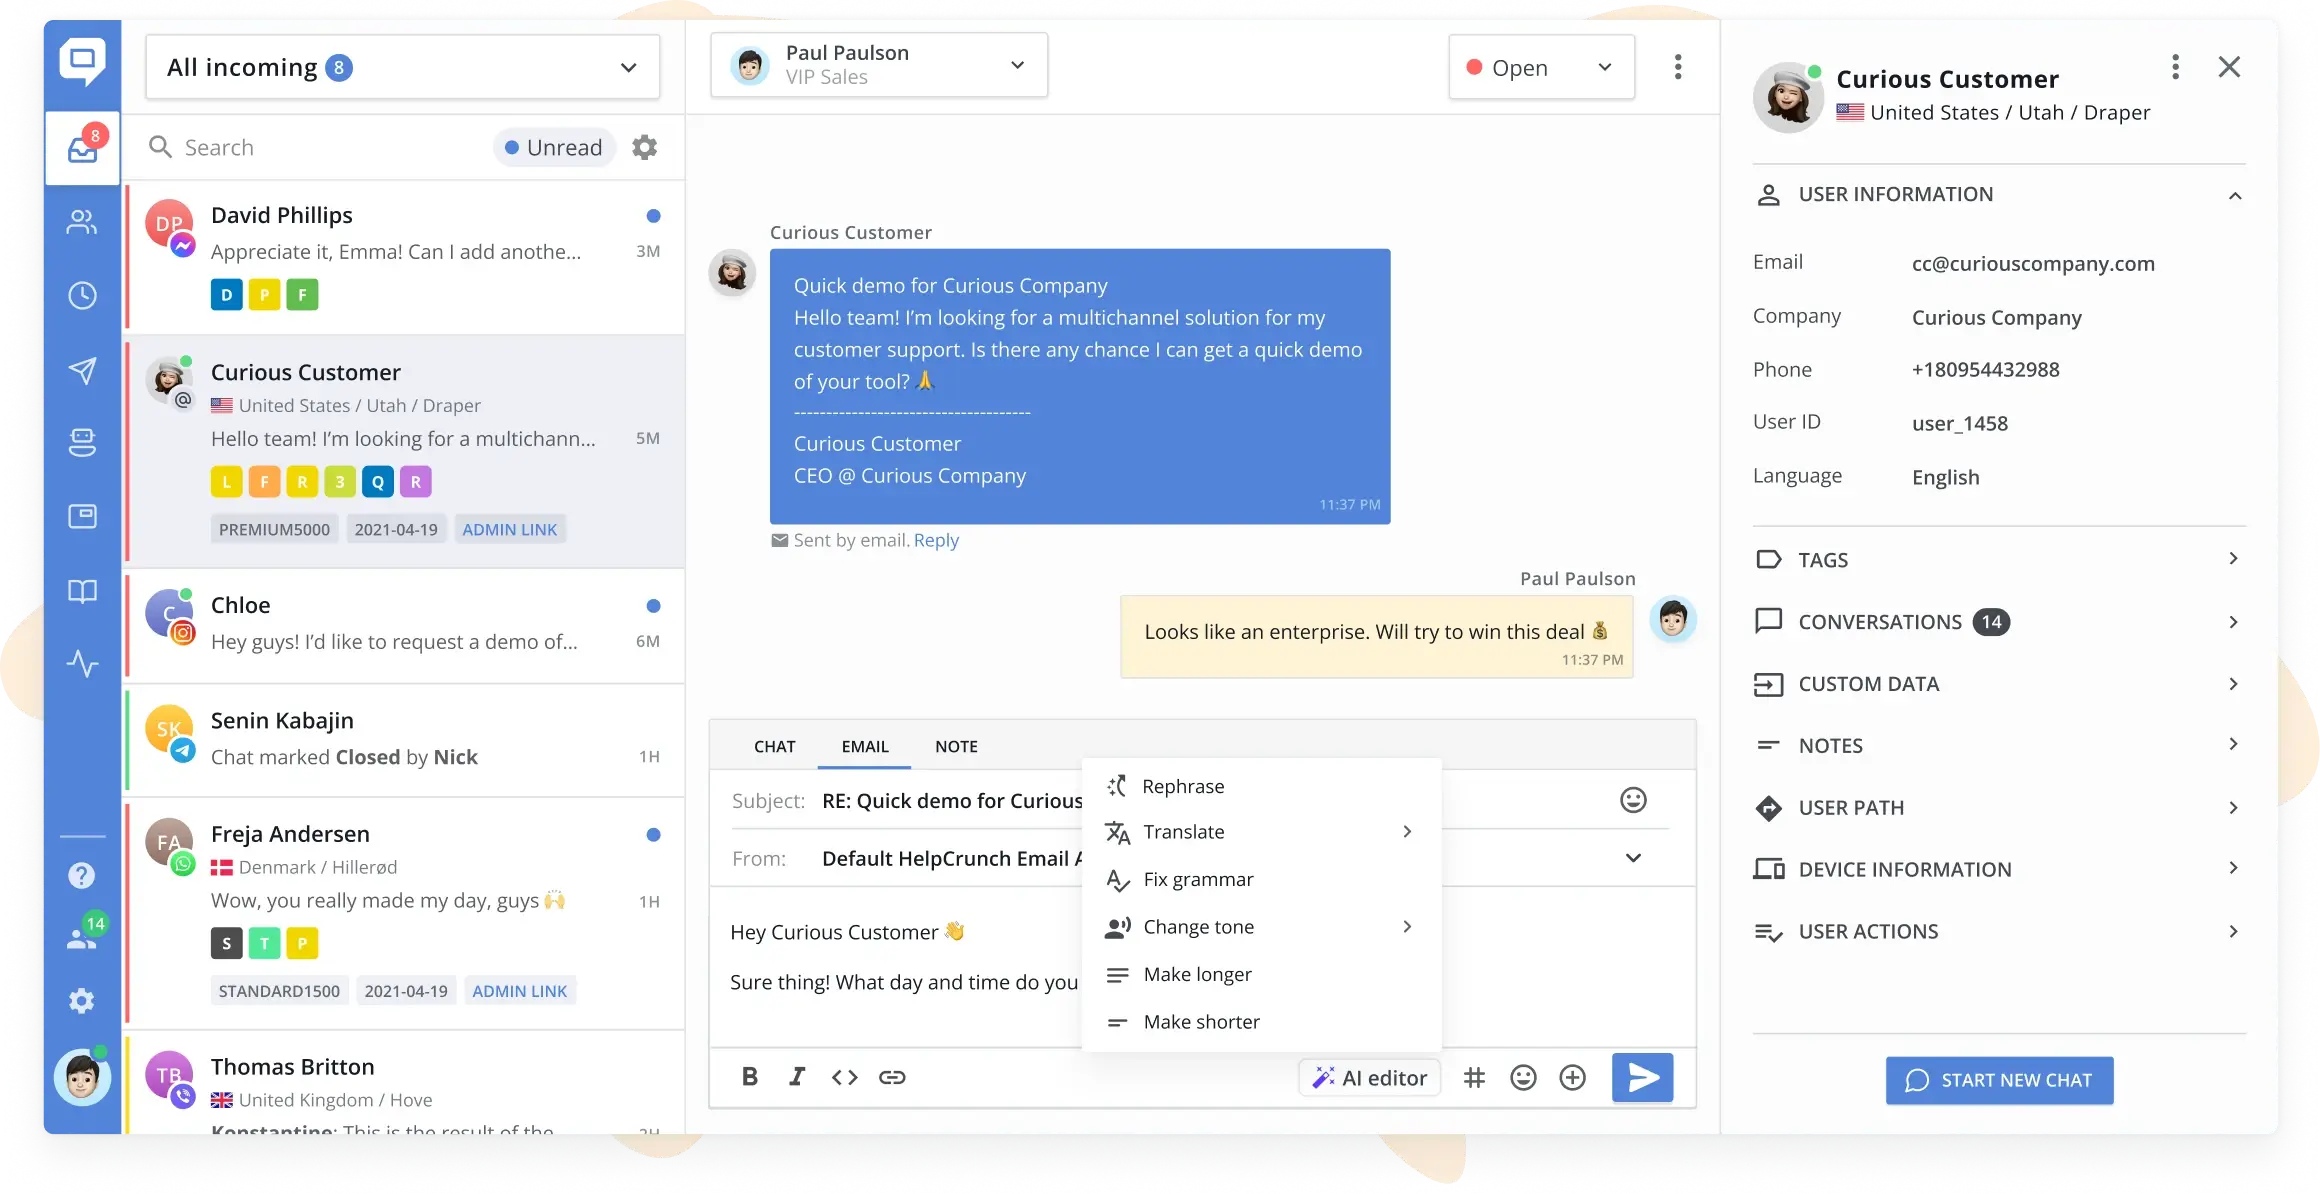 Complete dashboard of the HelpCrunch Shared Inbox